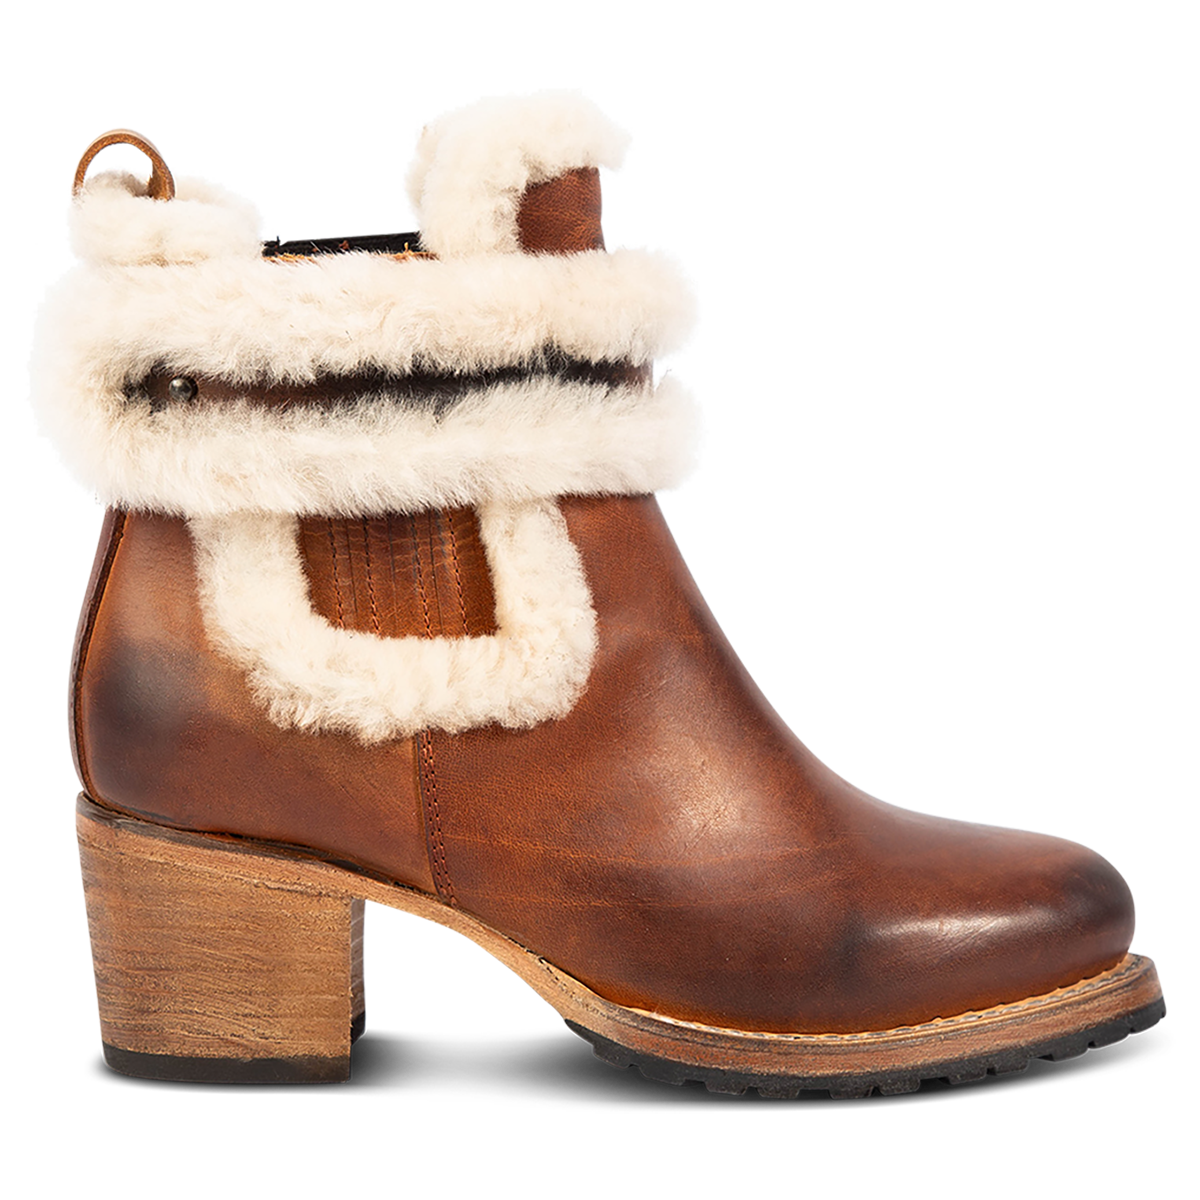 FREEBIRD women's Neverland tan leather bootie with genuine shearling decorative lining, gore detailing and a rubber tread sole